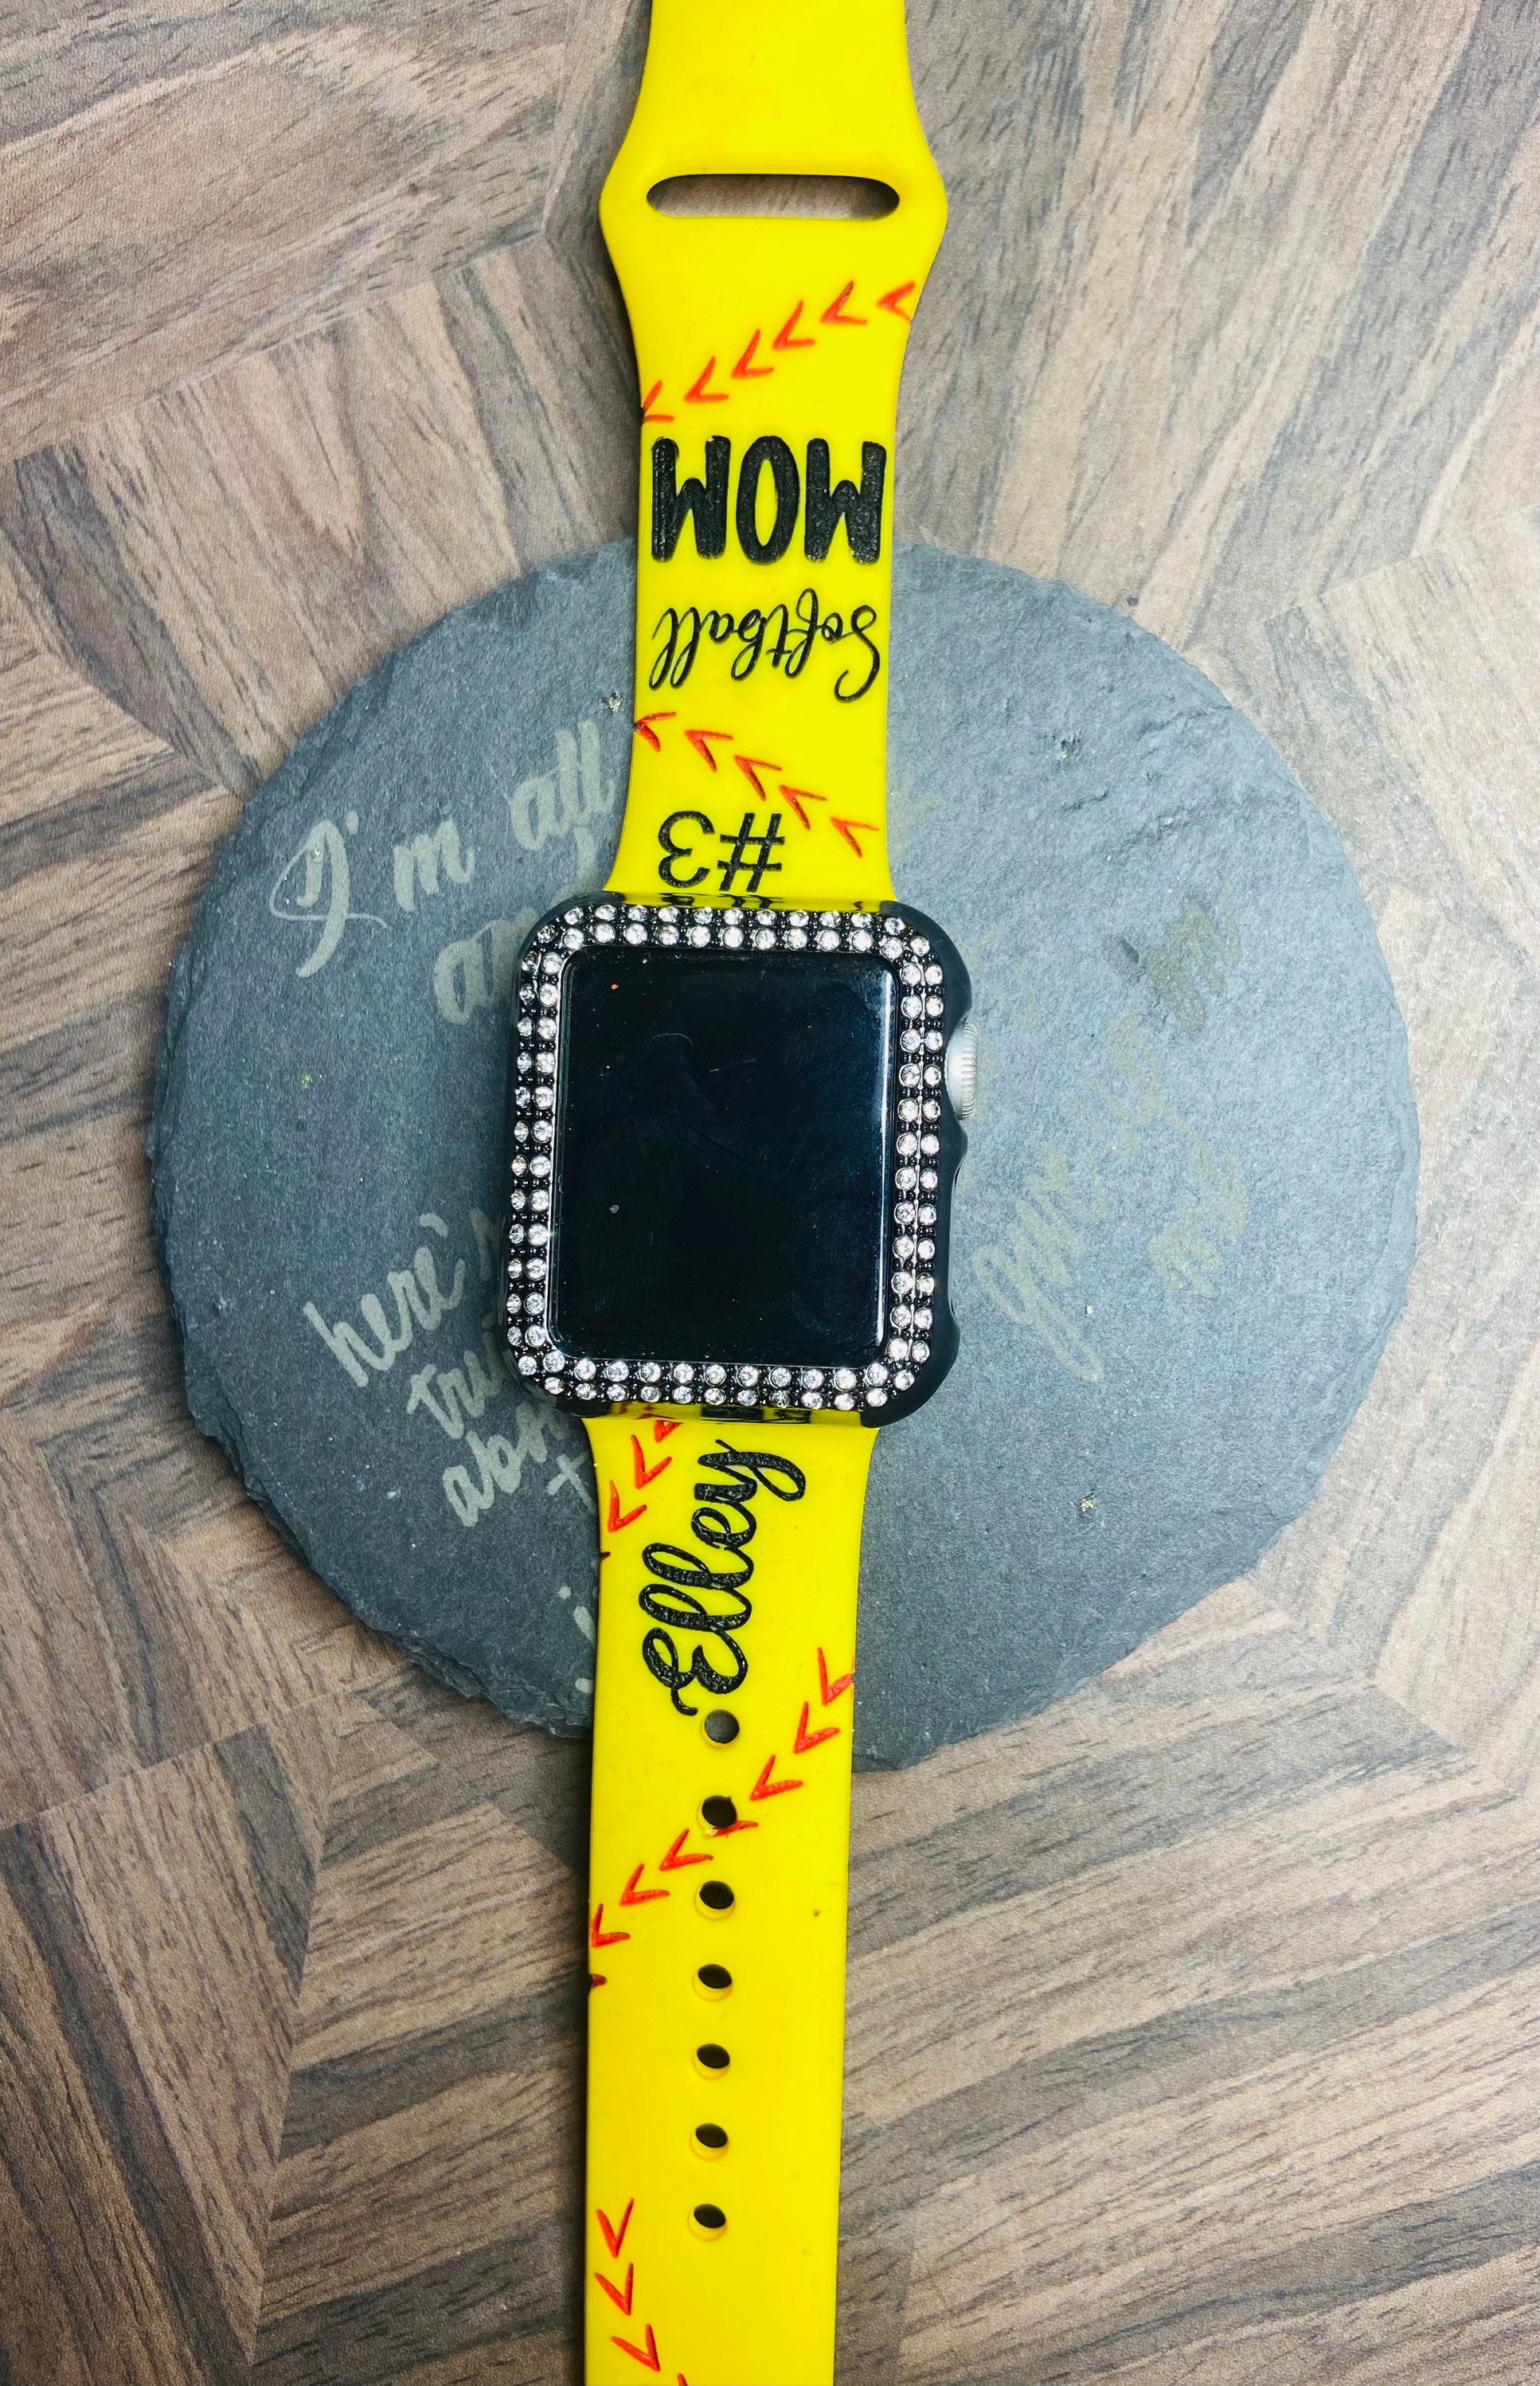 Softball Mom, laser engraved Apple watch band, Samsung, Fitbit versa 2, gift for mom, personalized gift, gift for women